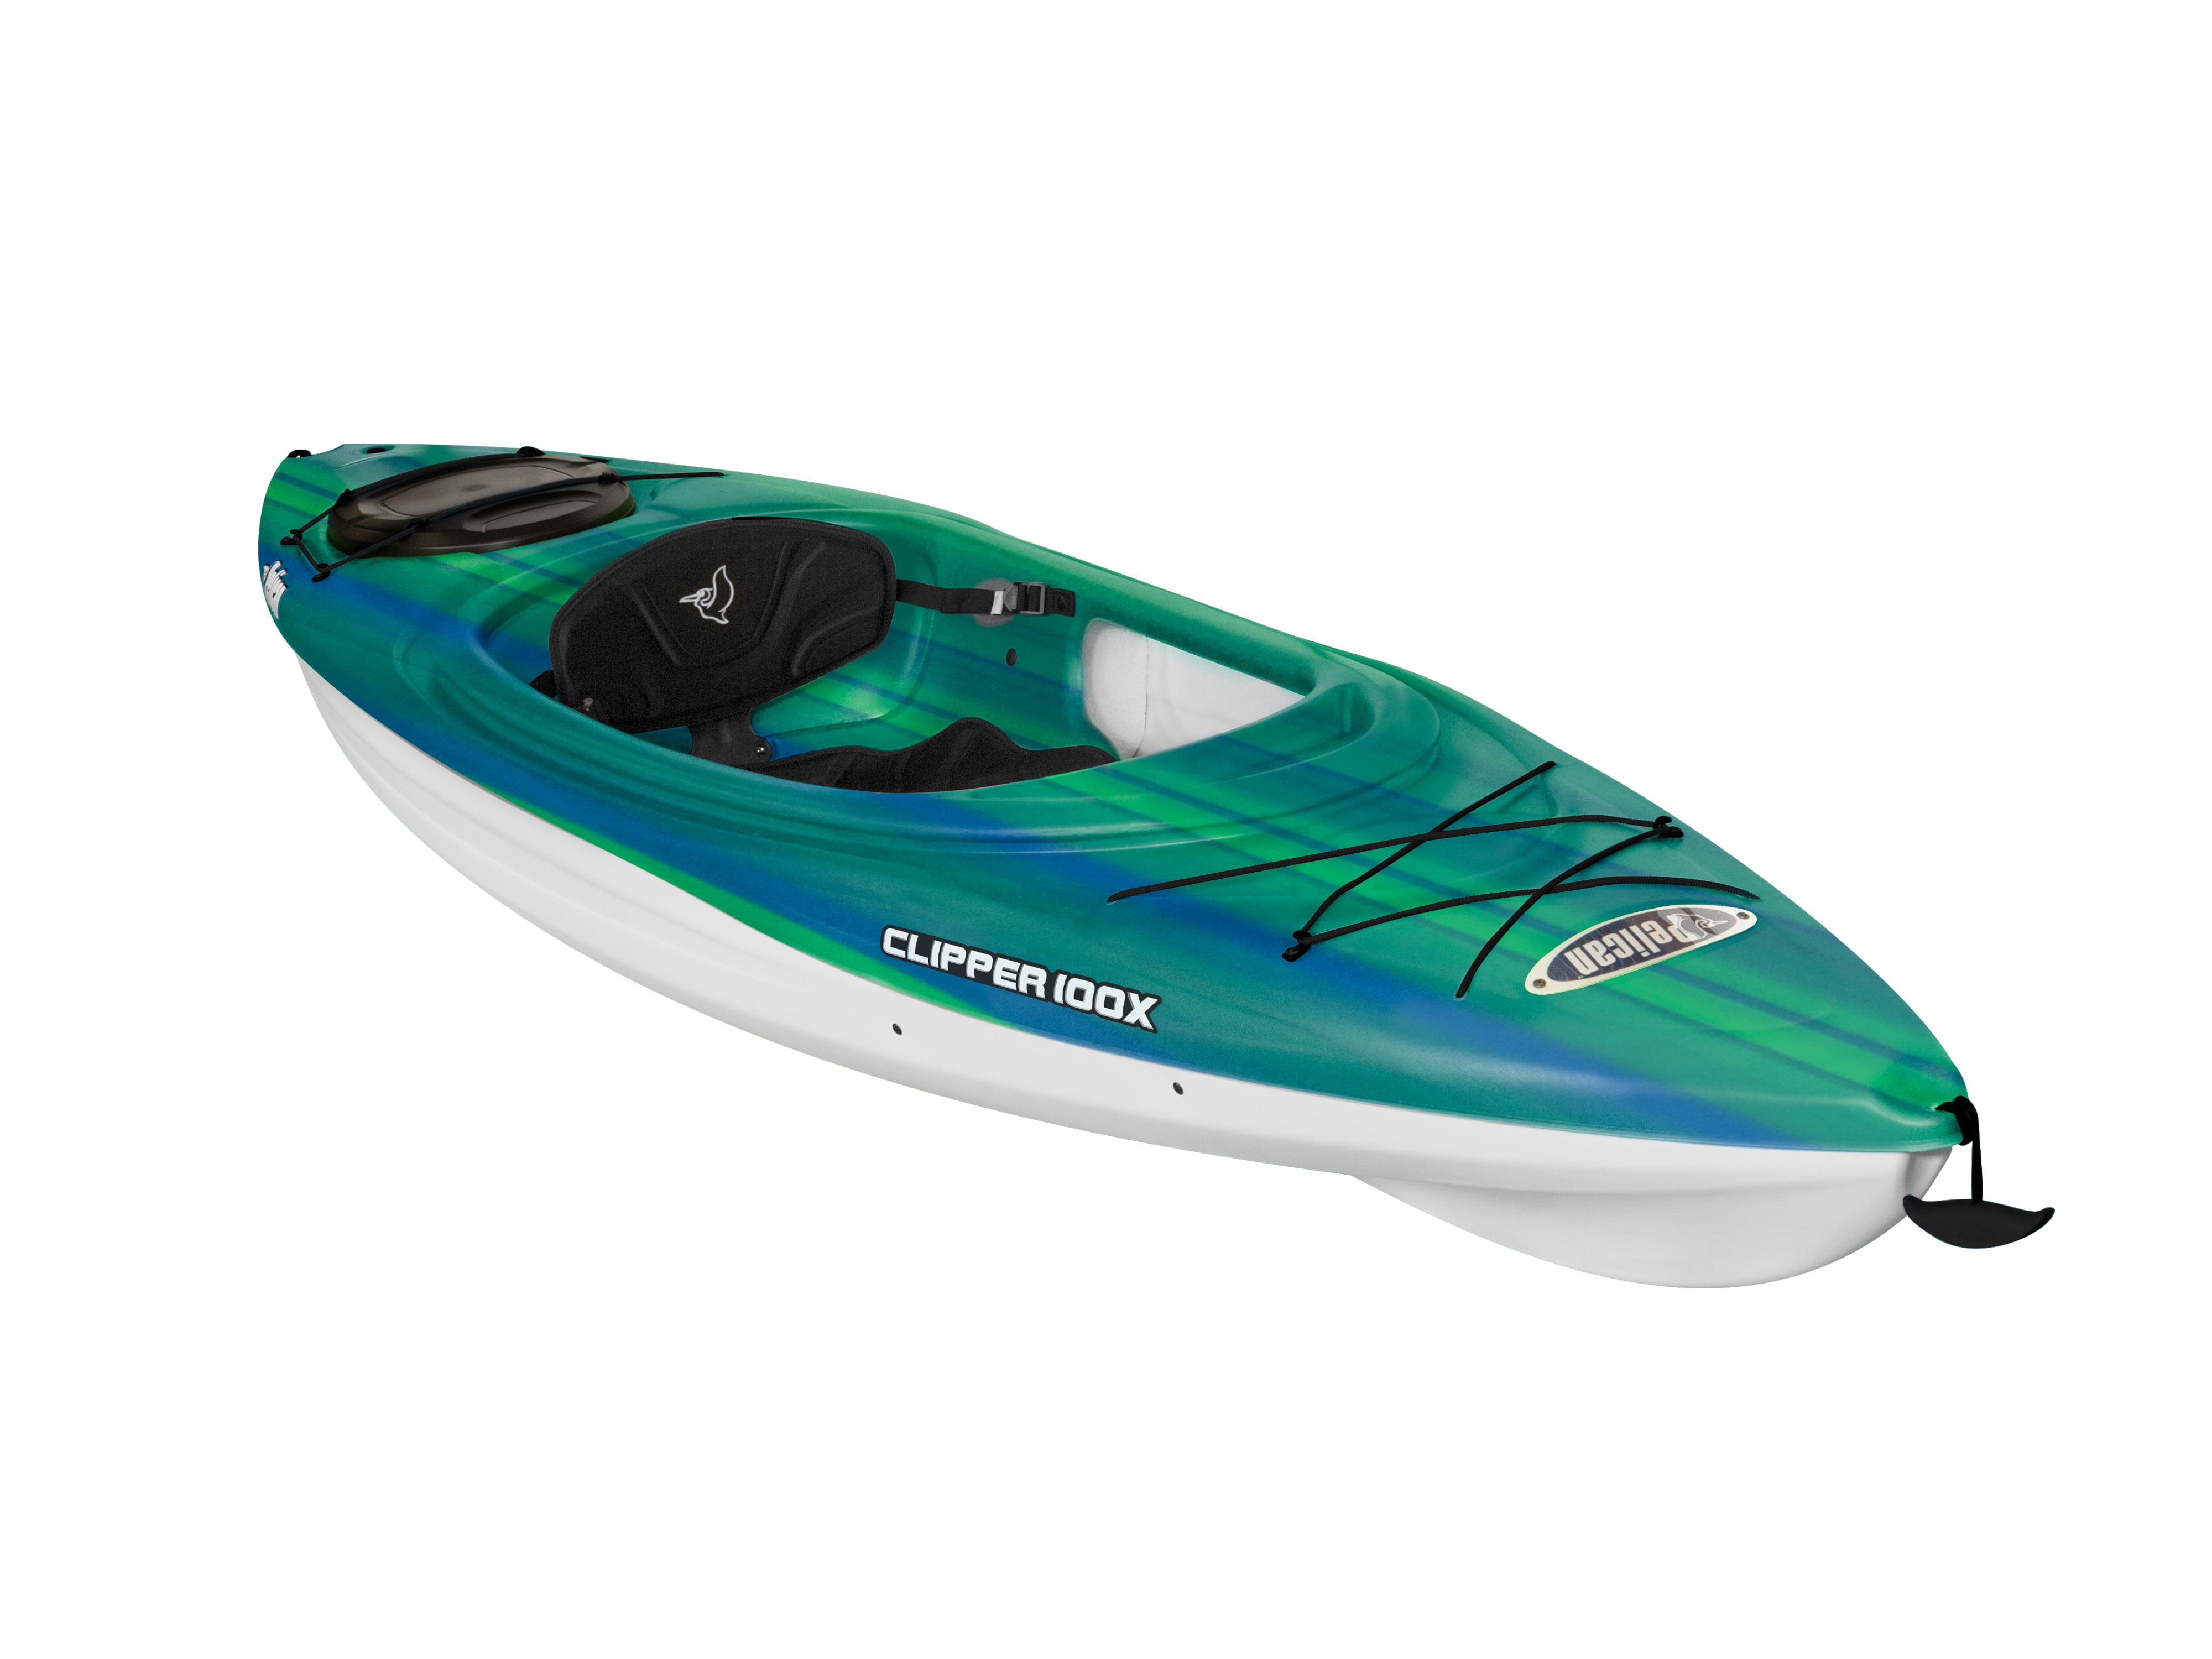 Pelican Clipper 100X 10-ft Recreational Kayak in Green & Blue with Padd...